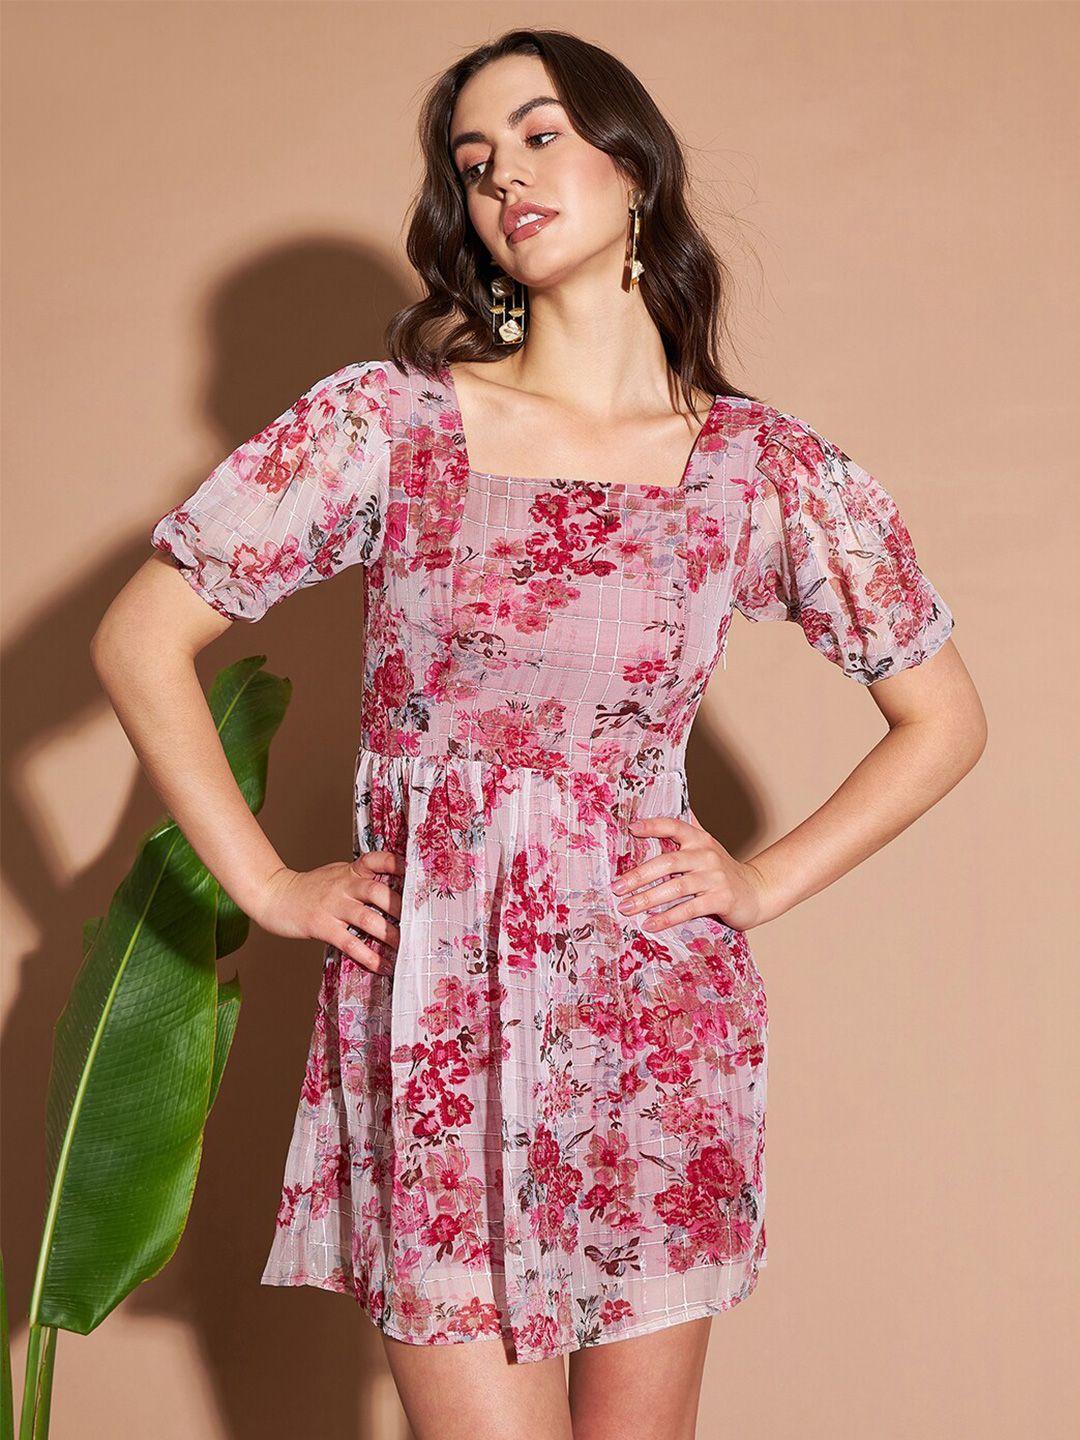 marie-claire-pink-floral-printed-puff-sleeve-chiffon-fit-&-flare-dress